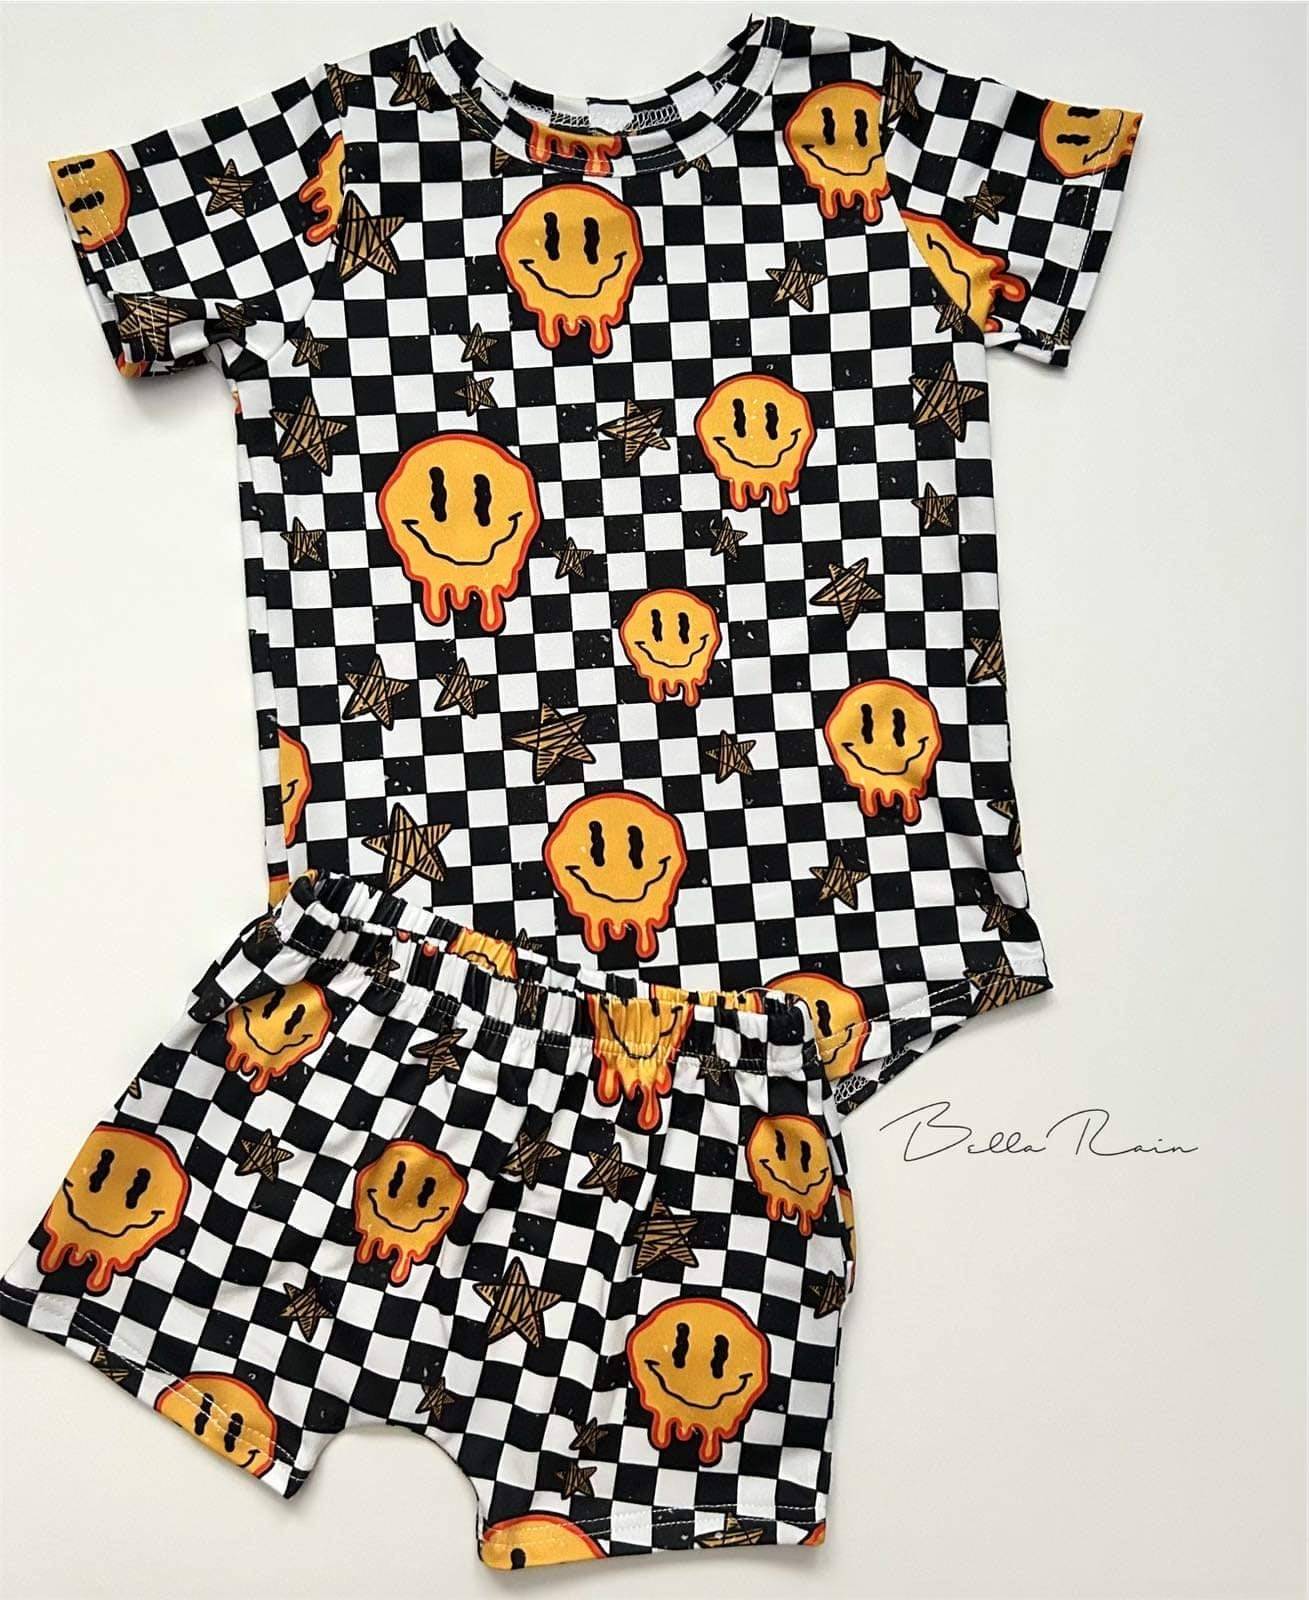 Checkered Smiley Tee/Shorts
This sunny smiley look is sure to put a smile on your face, featuring classic checkered print and drippy smiles. 
* All items are sold individually 
Care Instructio